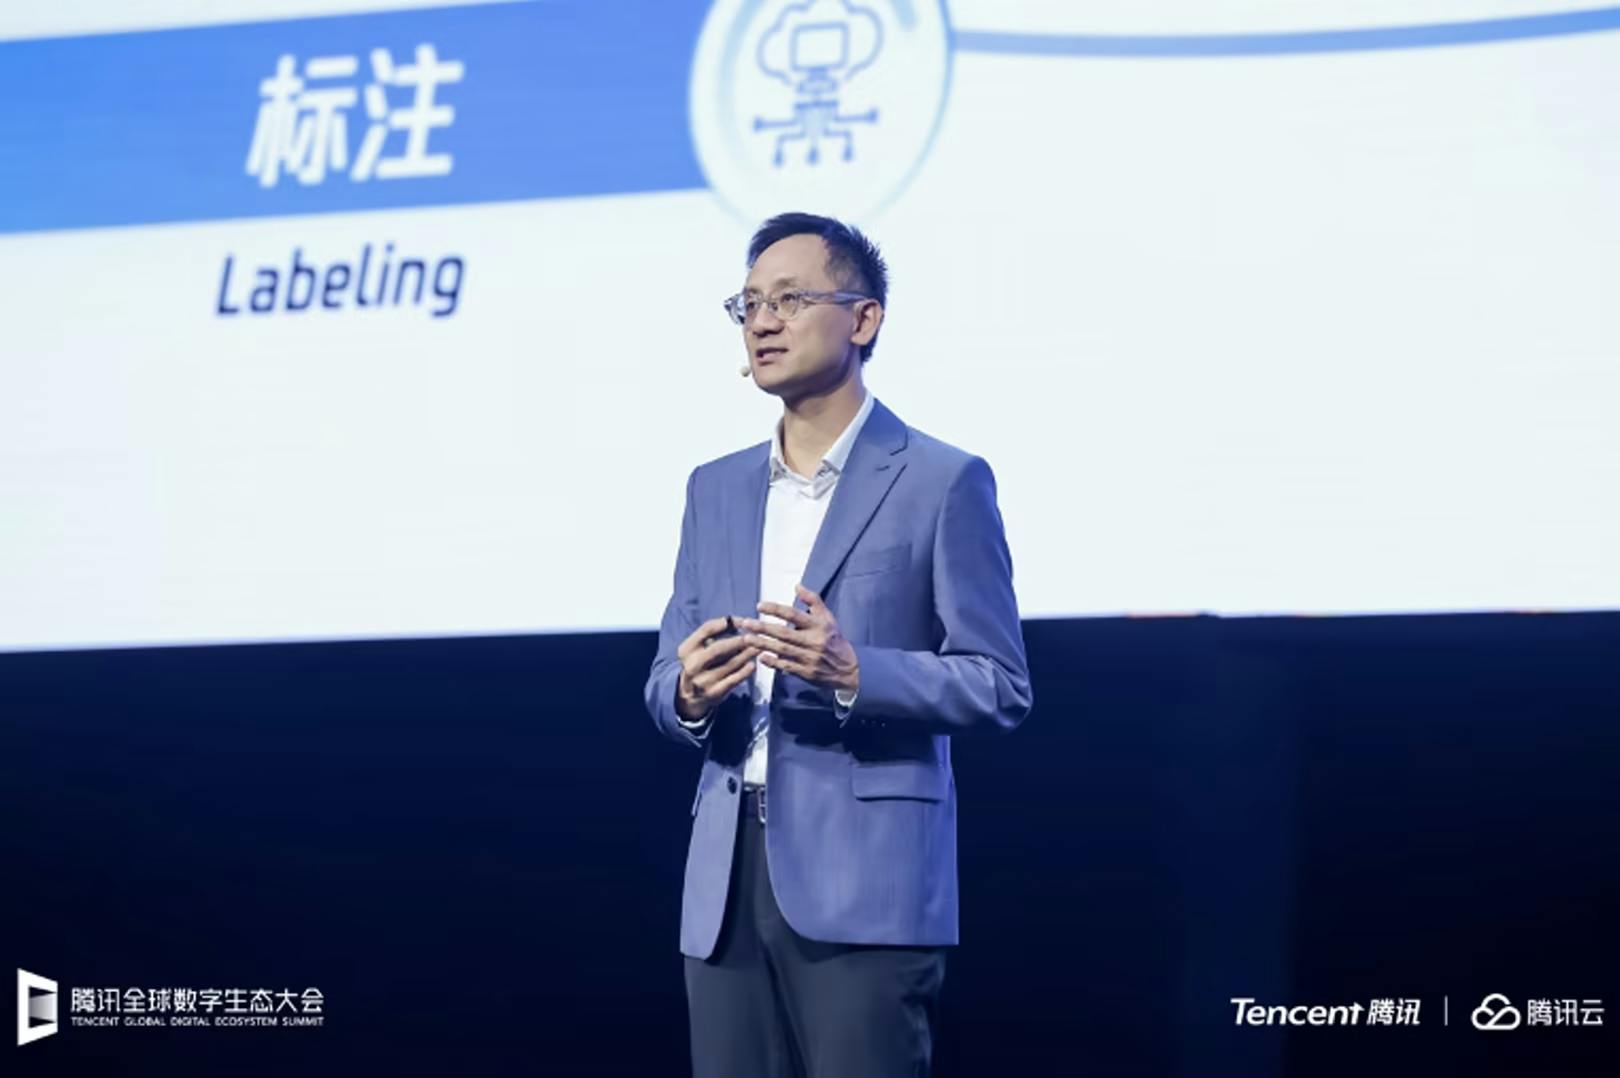 Dowson Tong, Senior Executive Vice President of Tencent and CEO of Tencent Cloud and Smart Industries Group